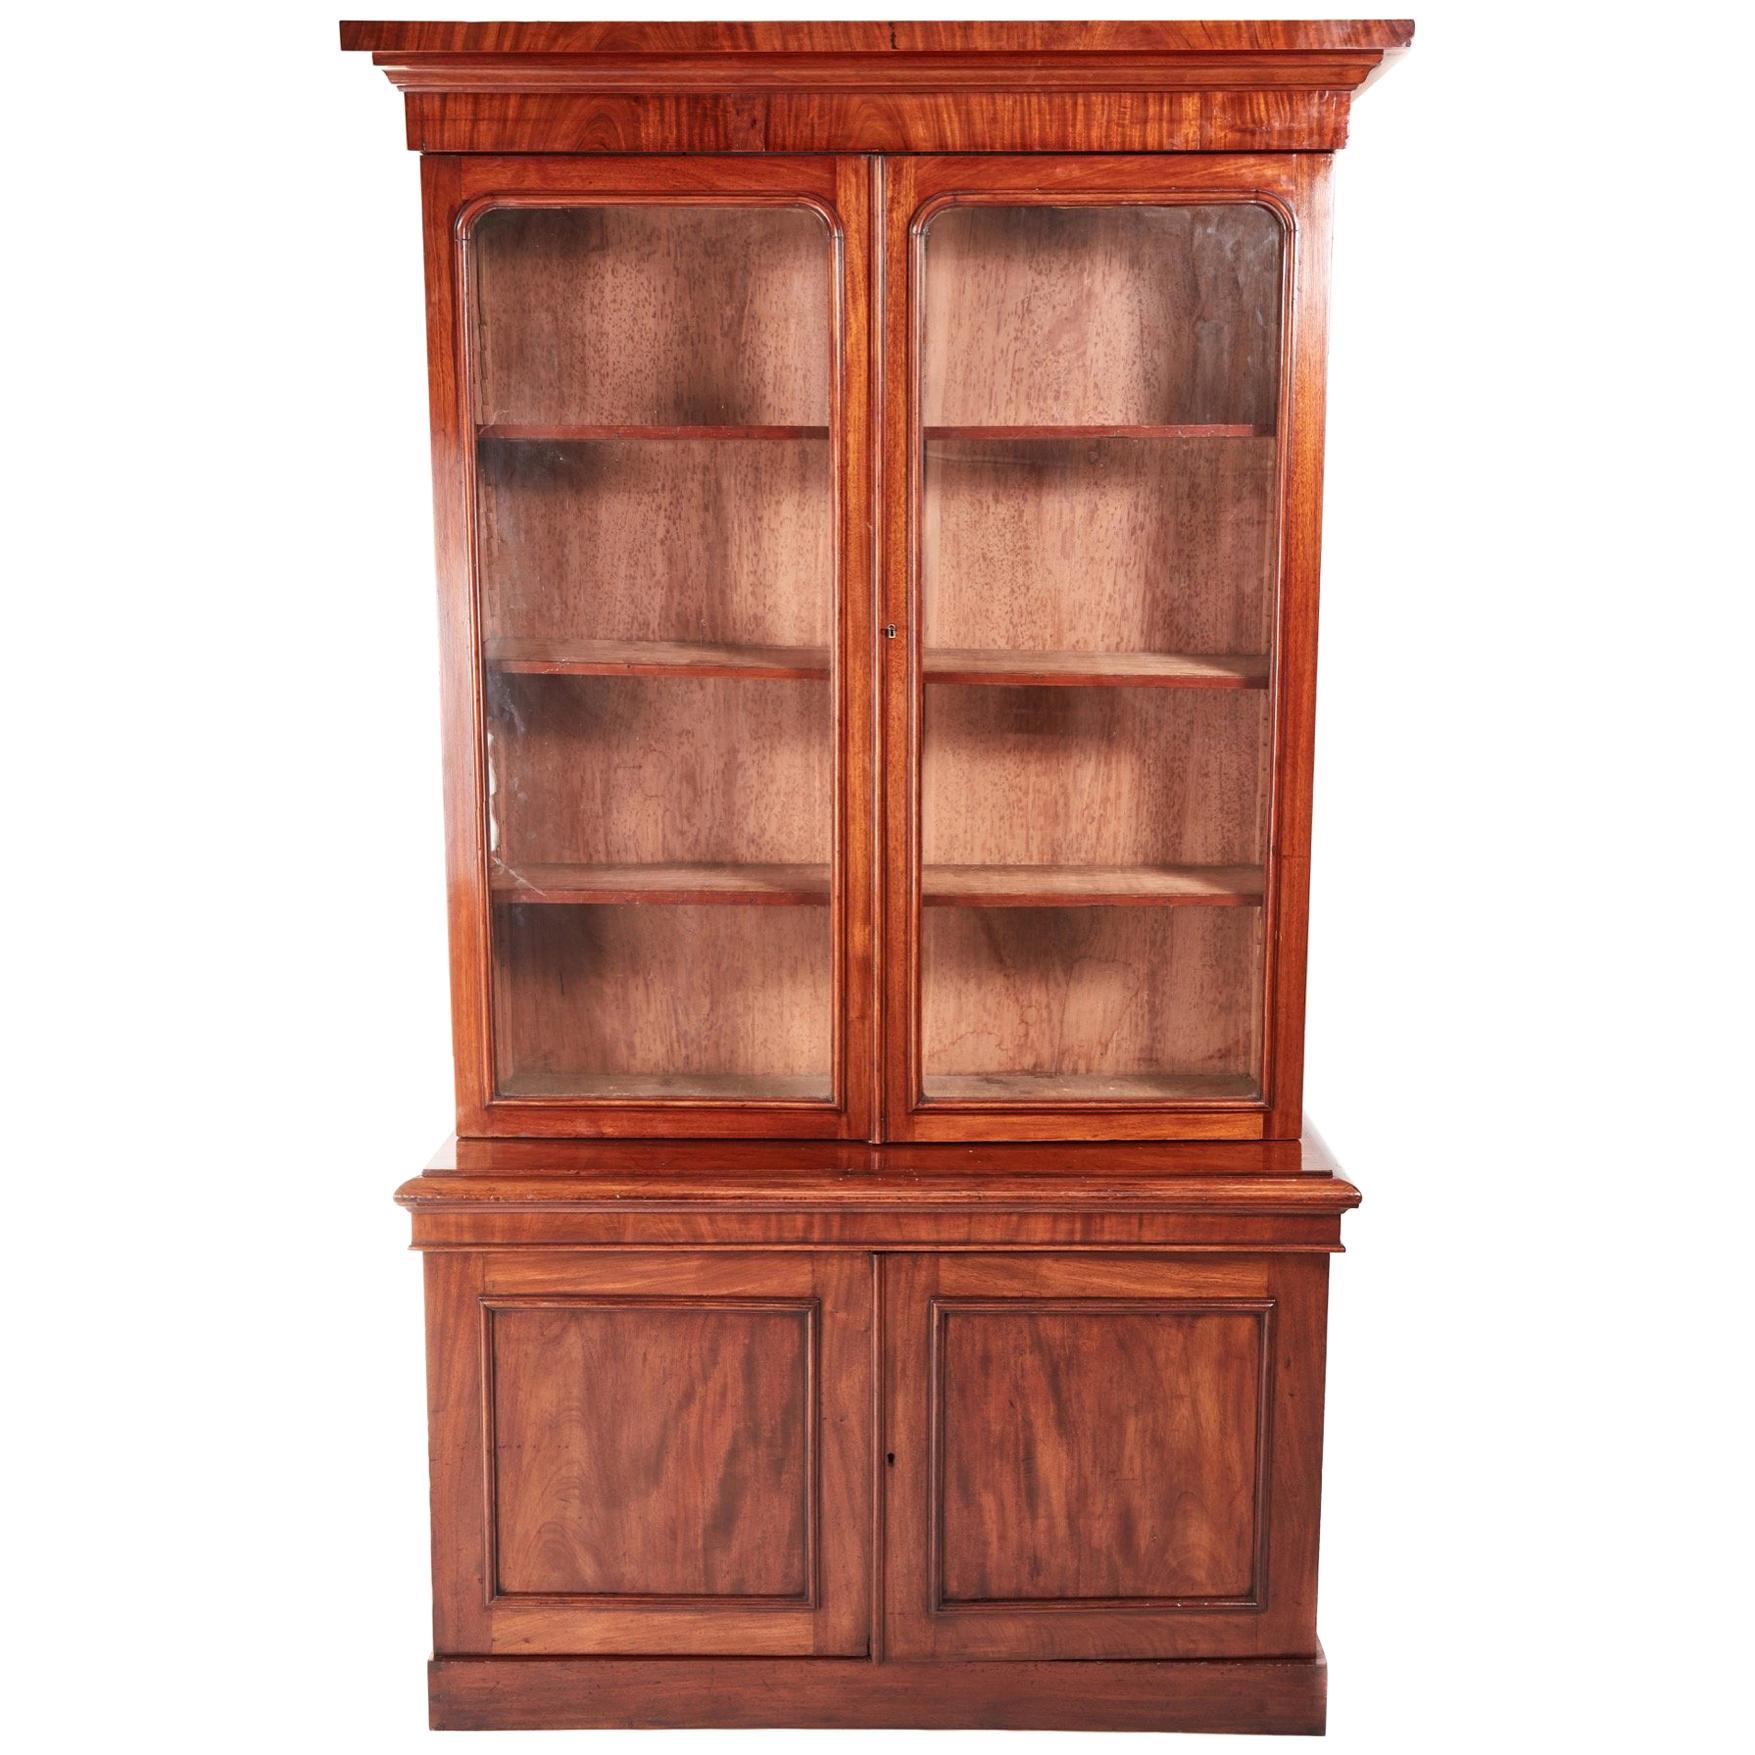 Quality Victorian Mahogany Bookcase For Sale